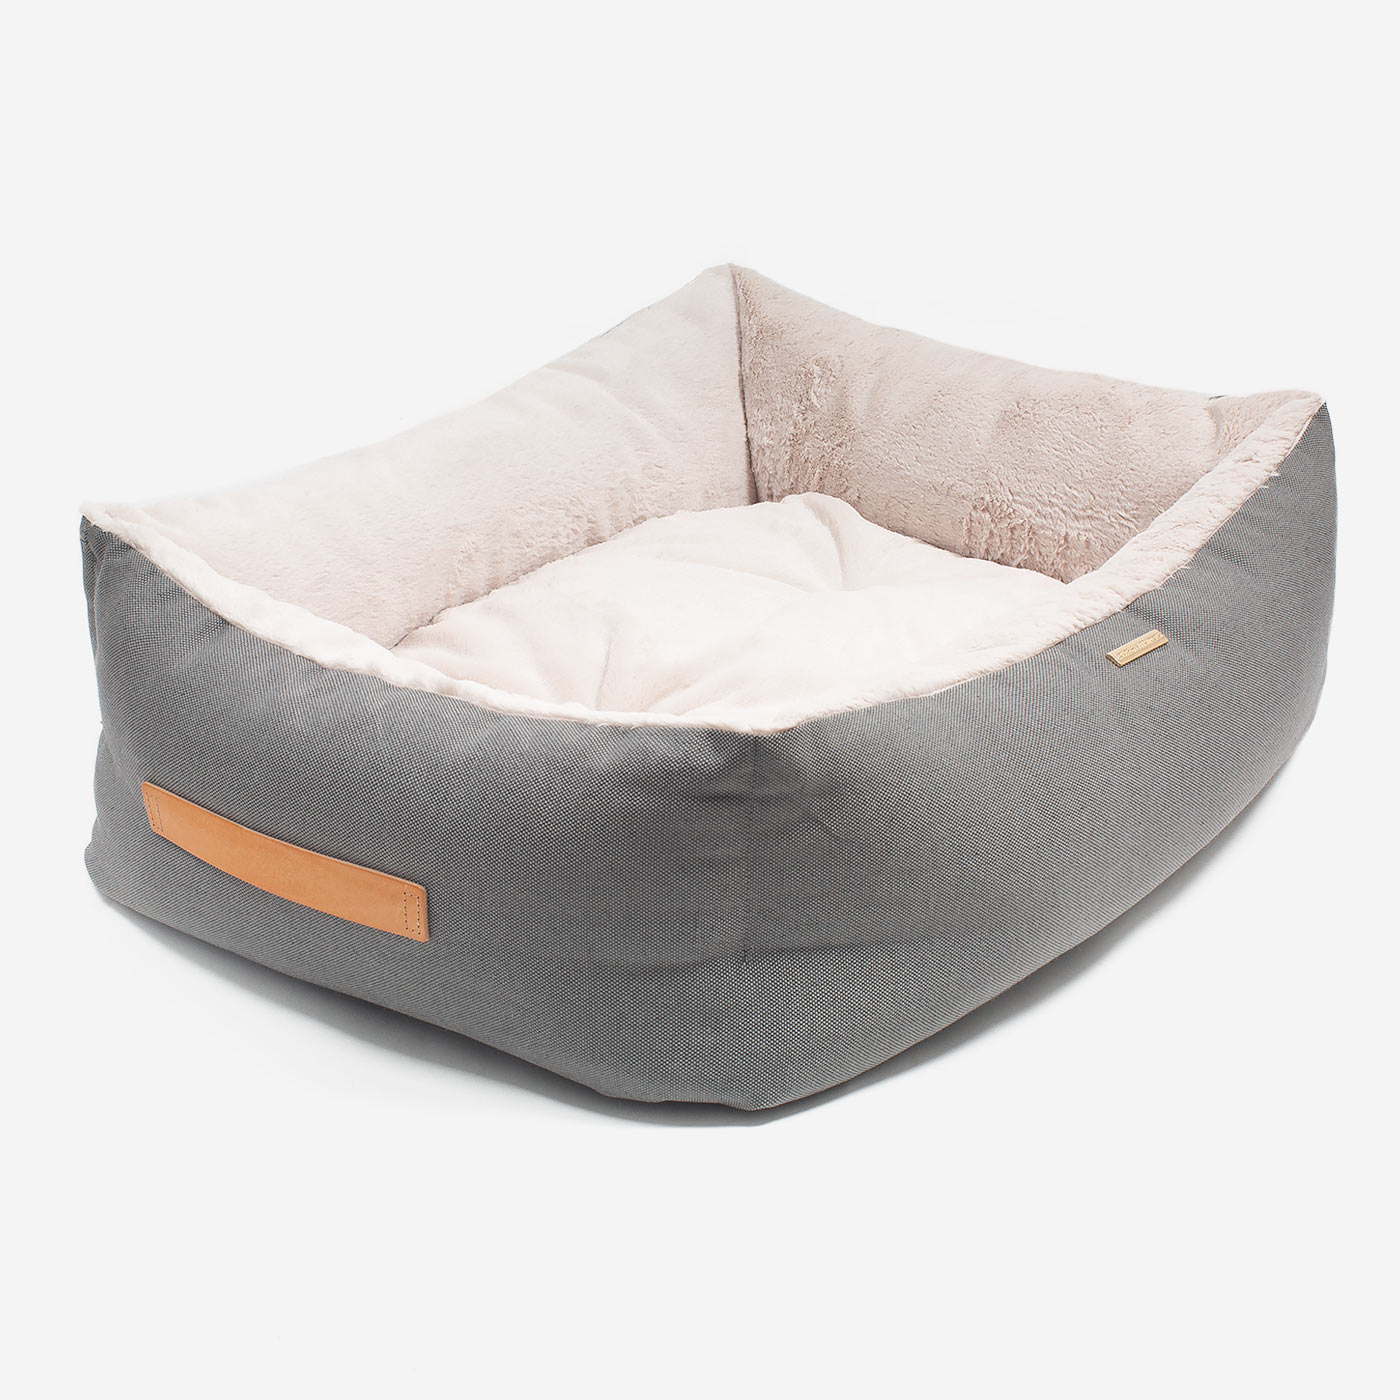 Discover This Luxurious Box Bed For Dogs, Made Using Beautiful Twill Fabric To Craft The Perfect Dog Box Bed! In Stunning Grey Slate, Available Now at Lords & Labradors US